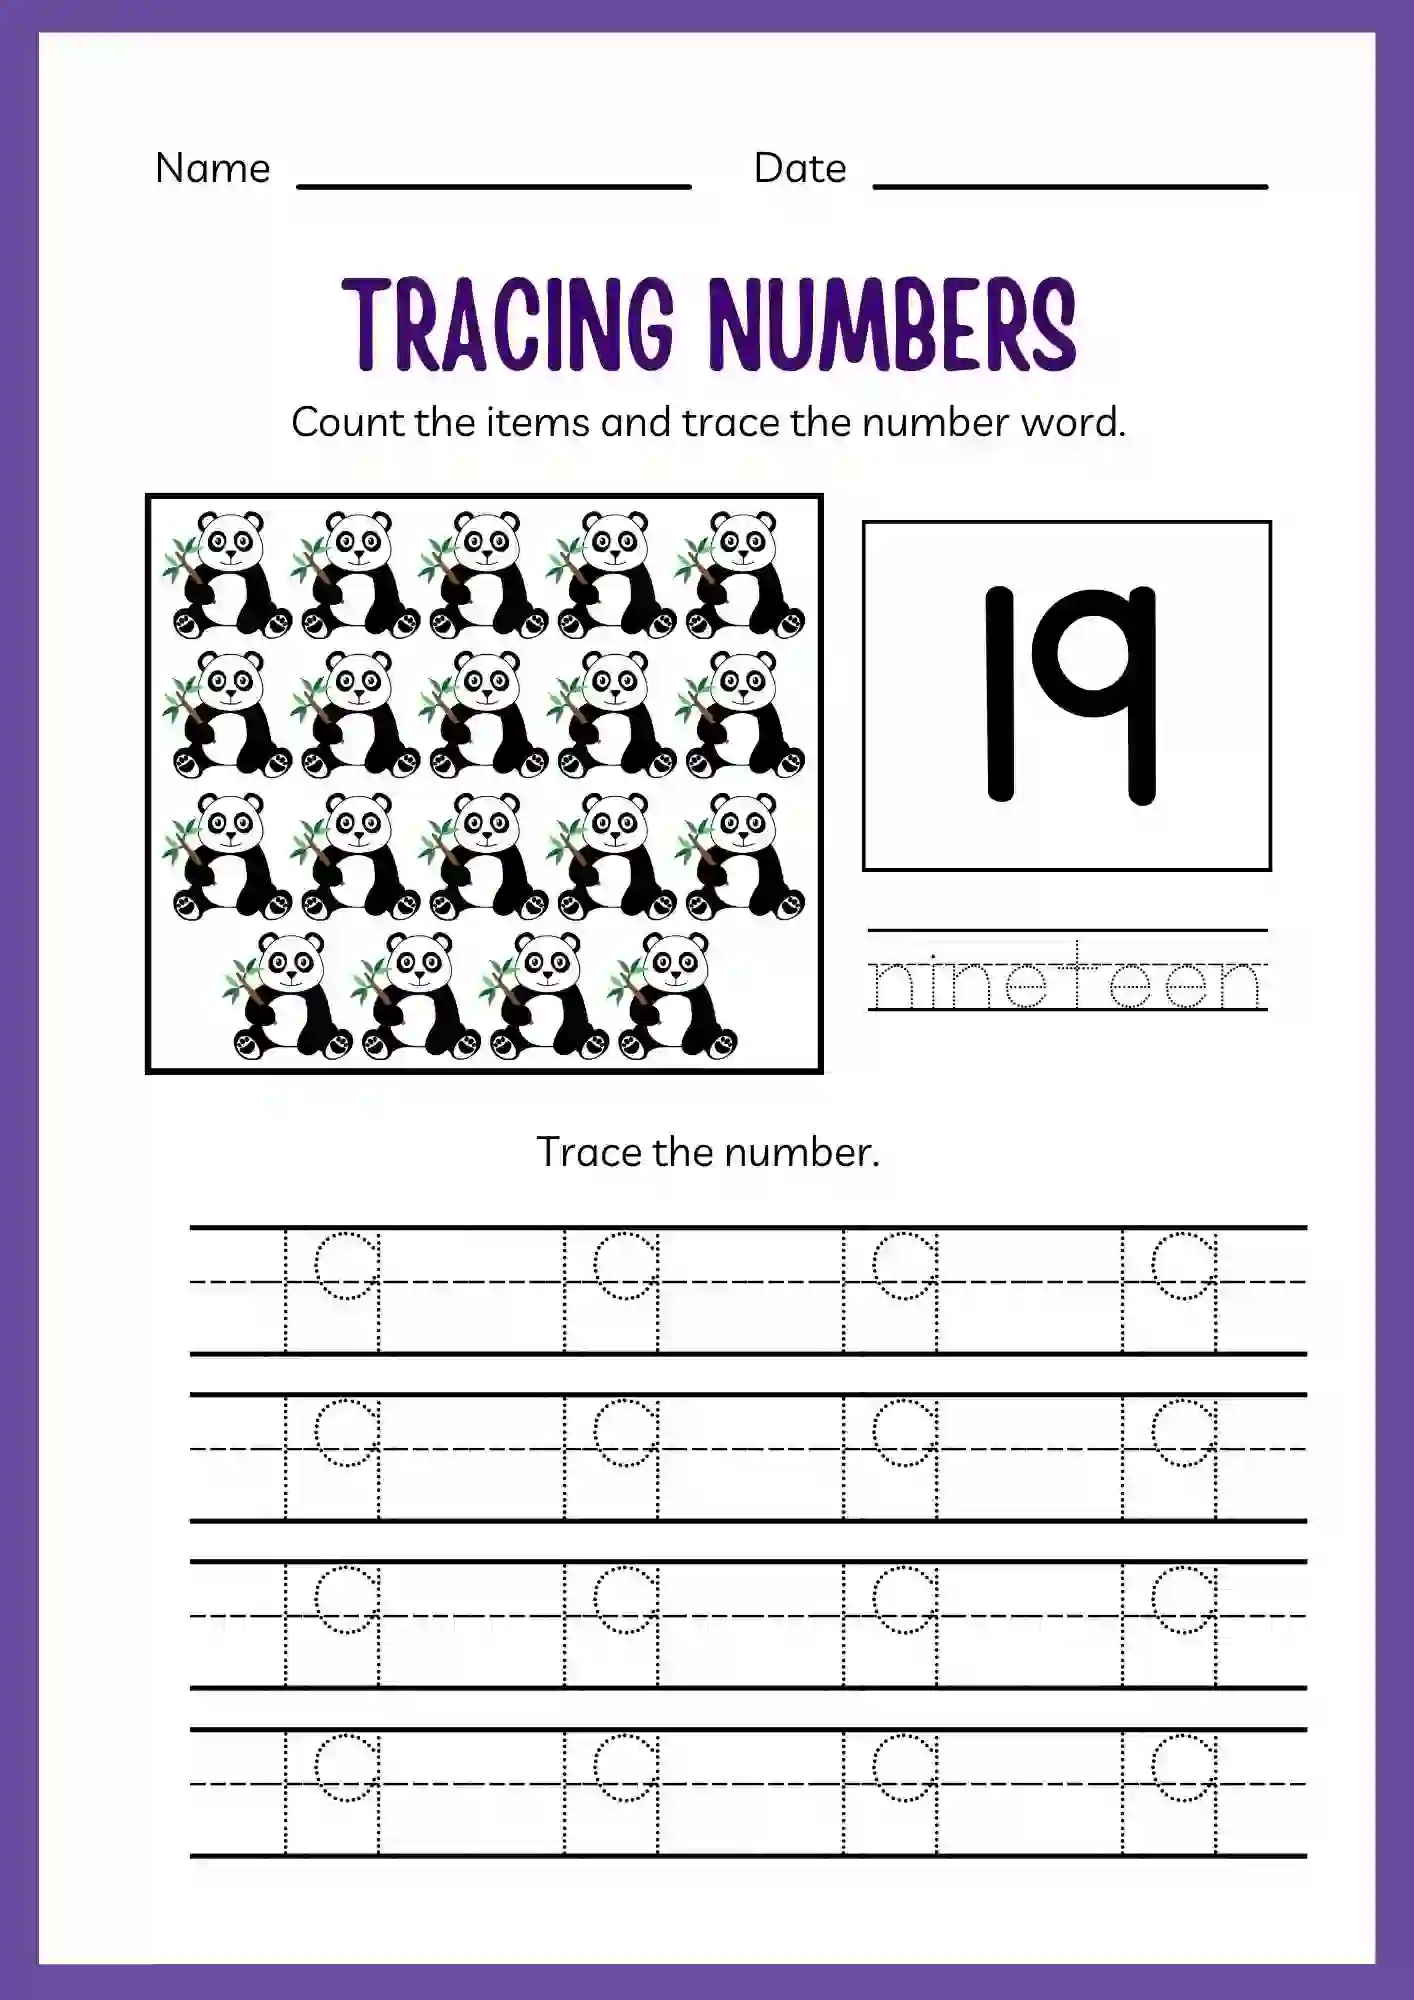 Number Tracing Worksheets 1 to 20 (Number 19 tracing sheet)